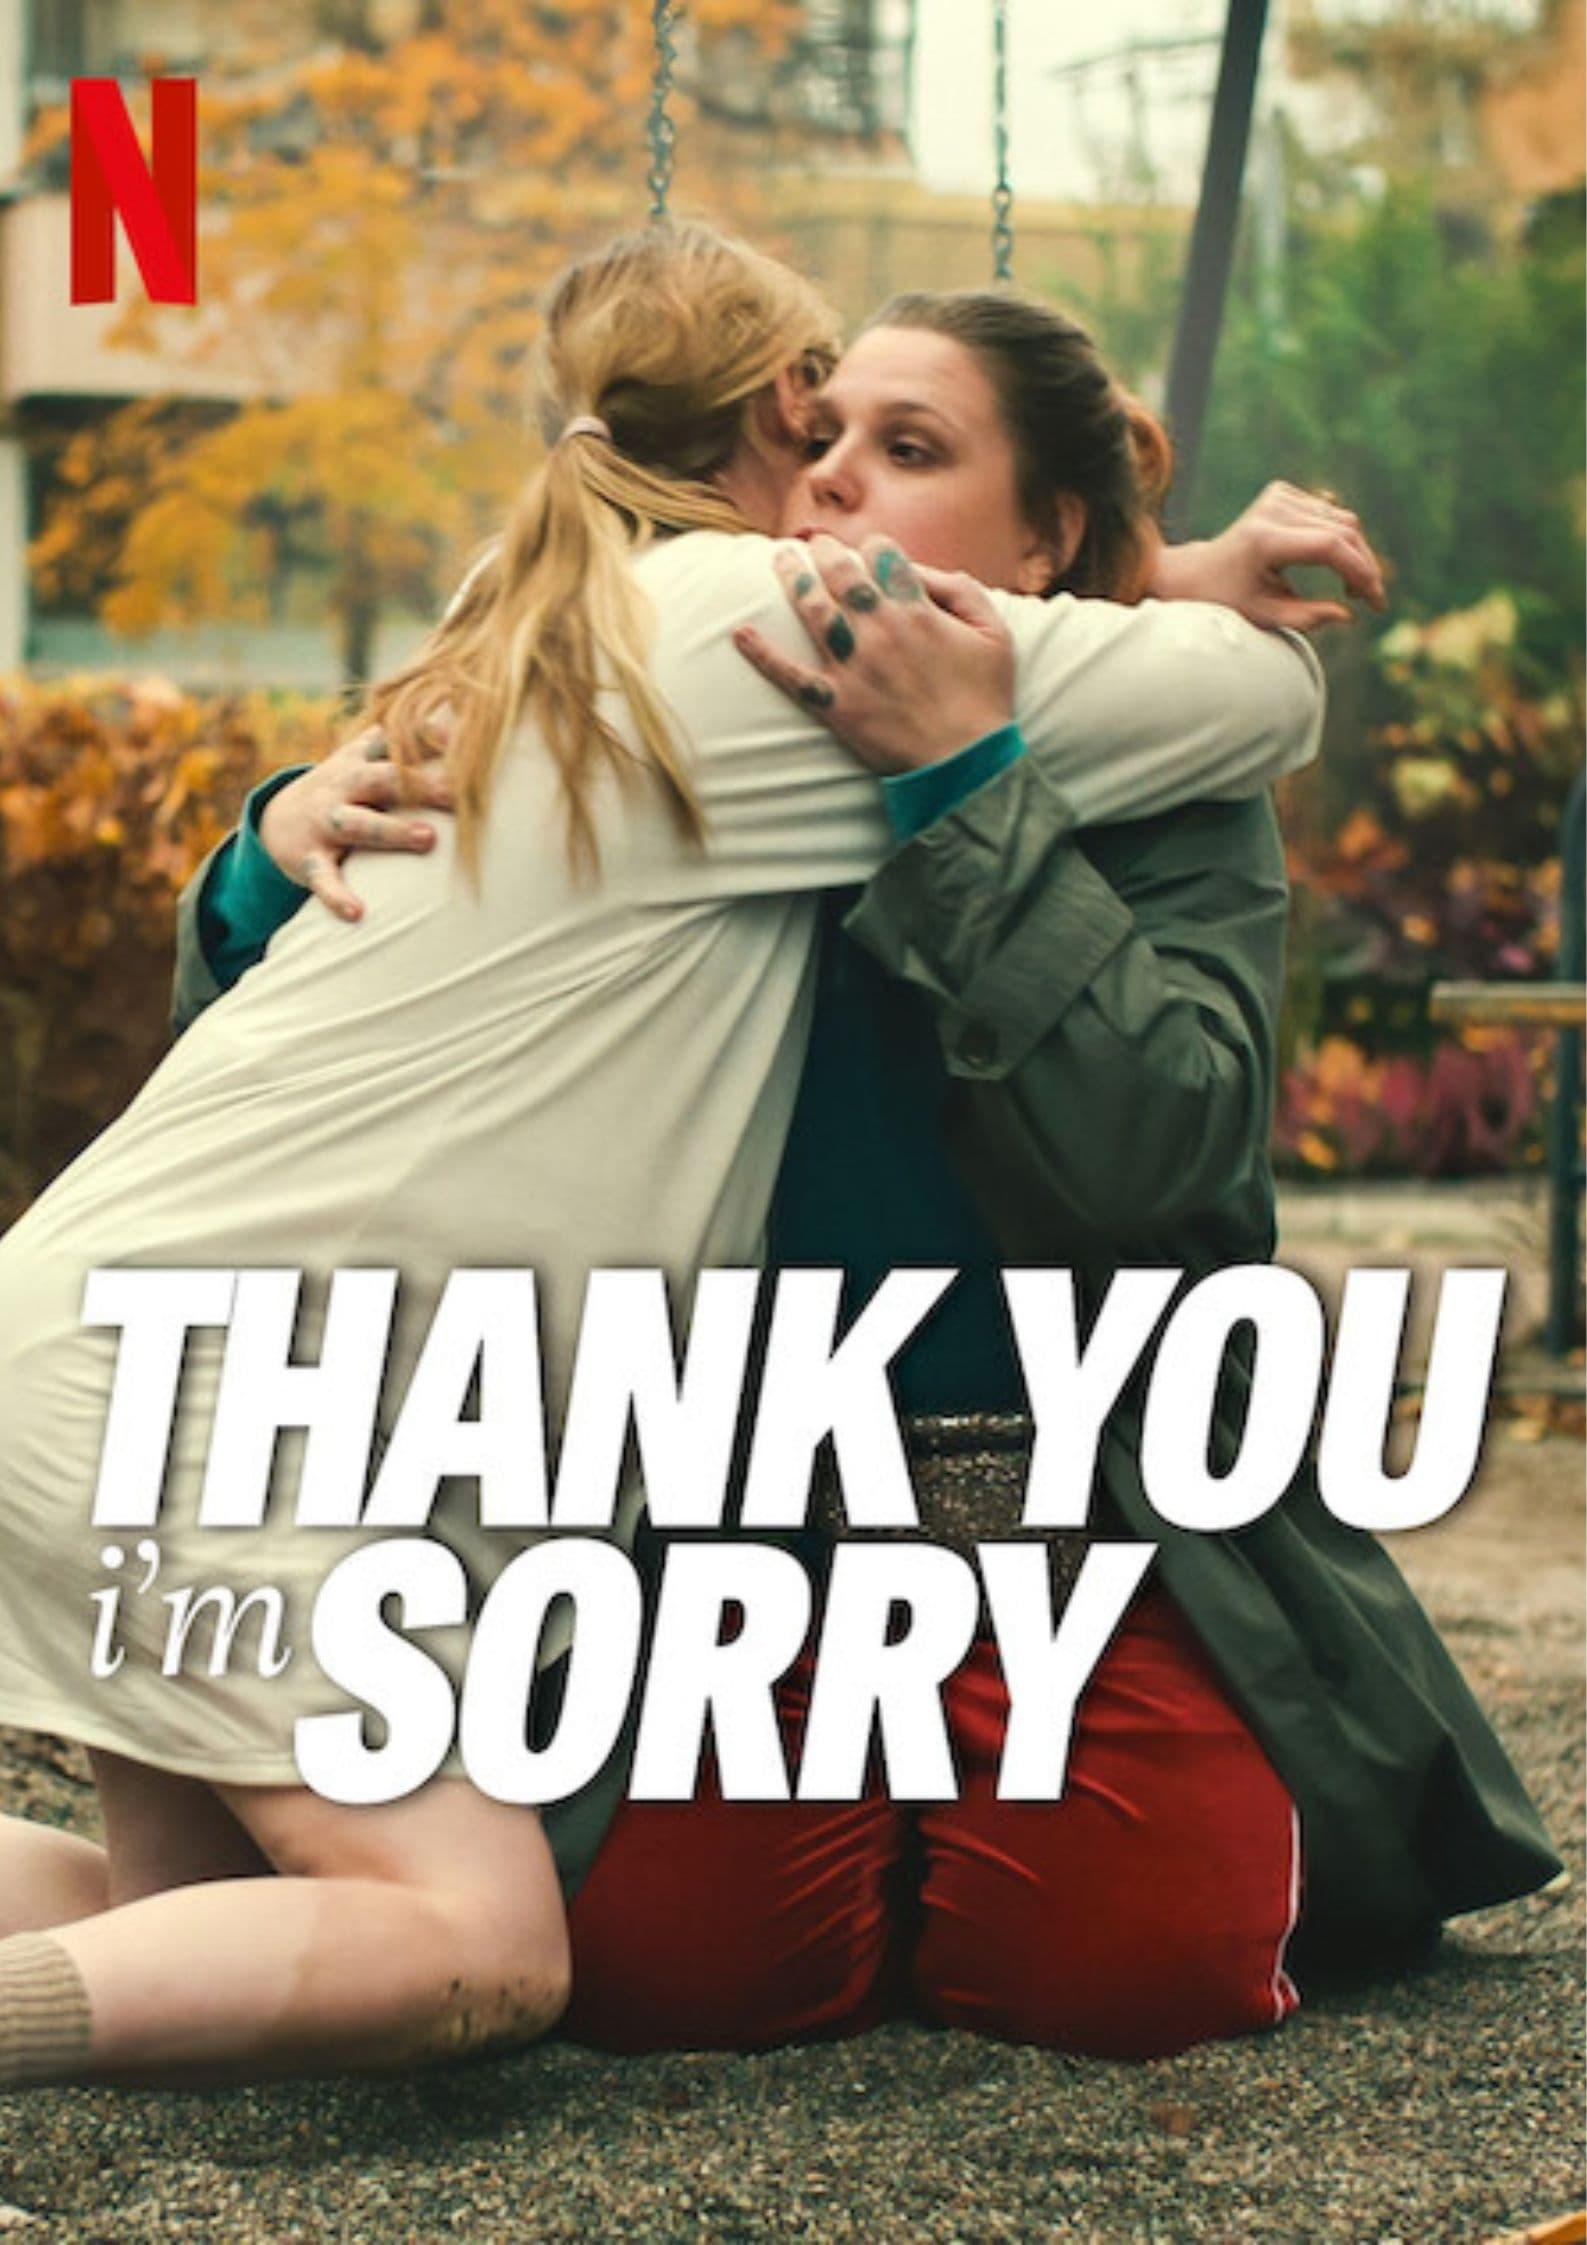 Thank You, I'm Sorry poster